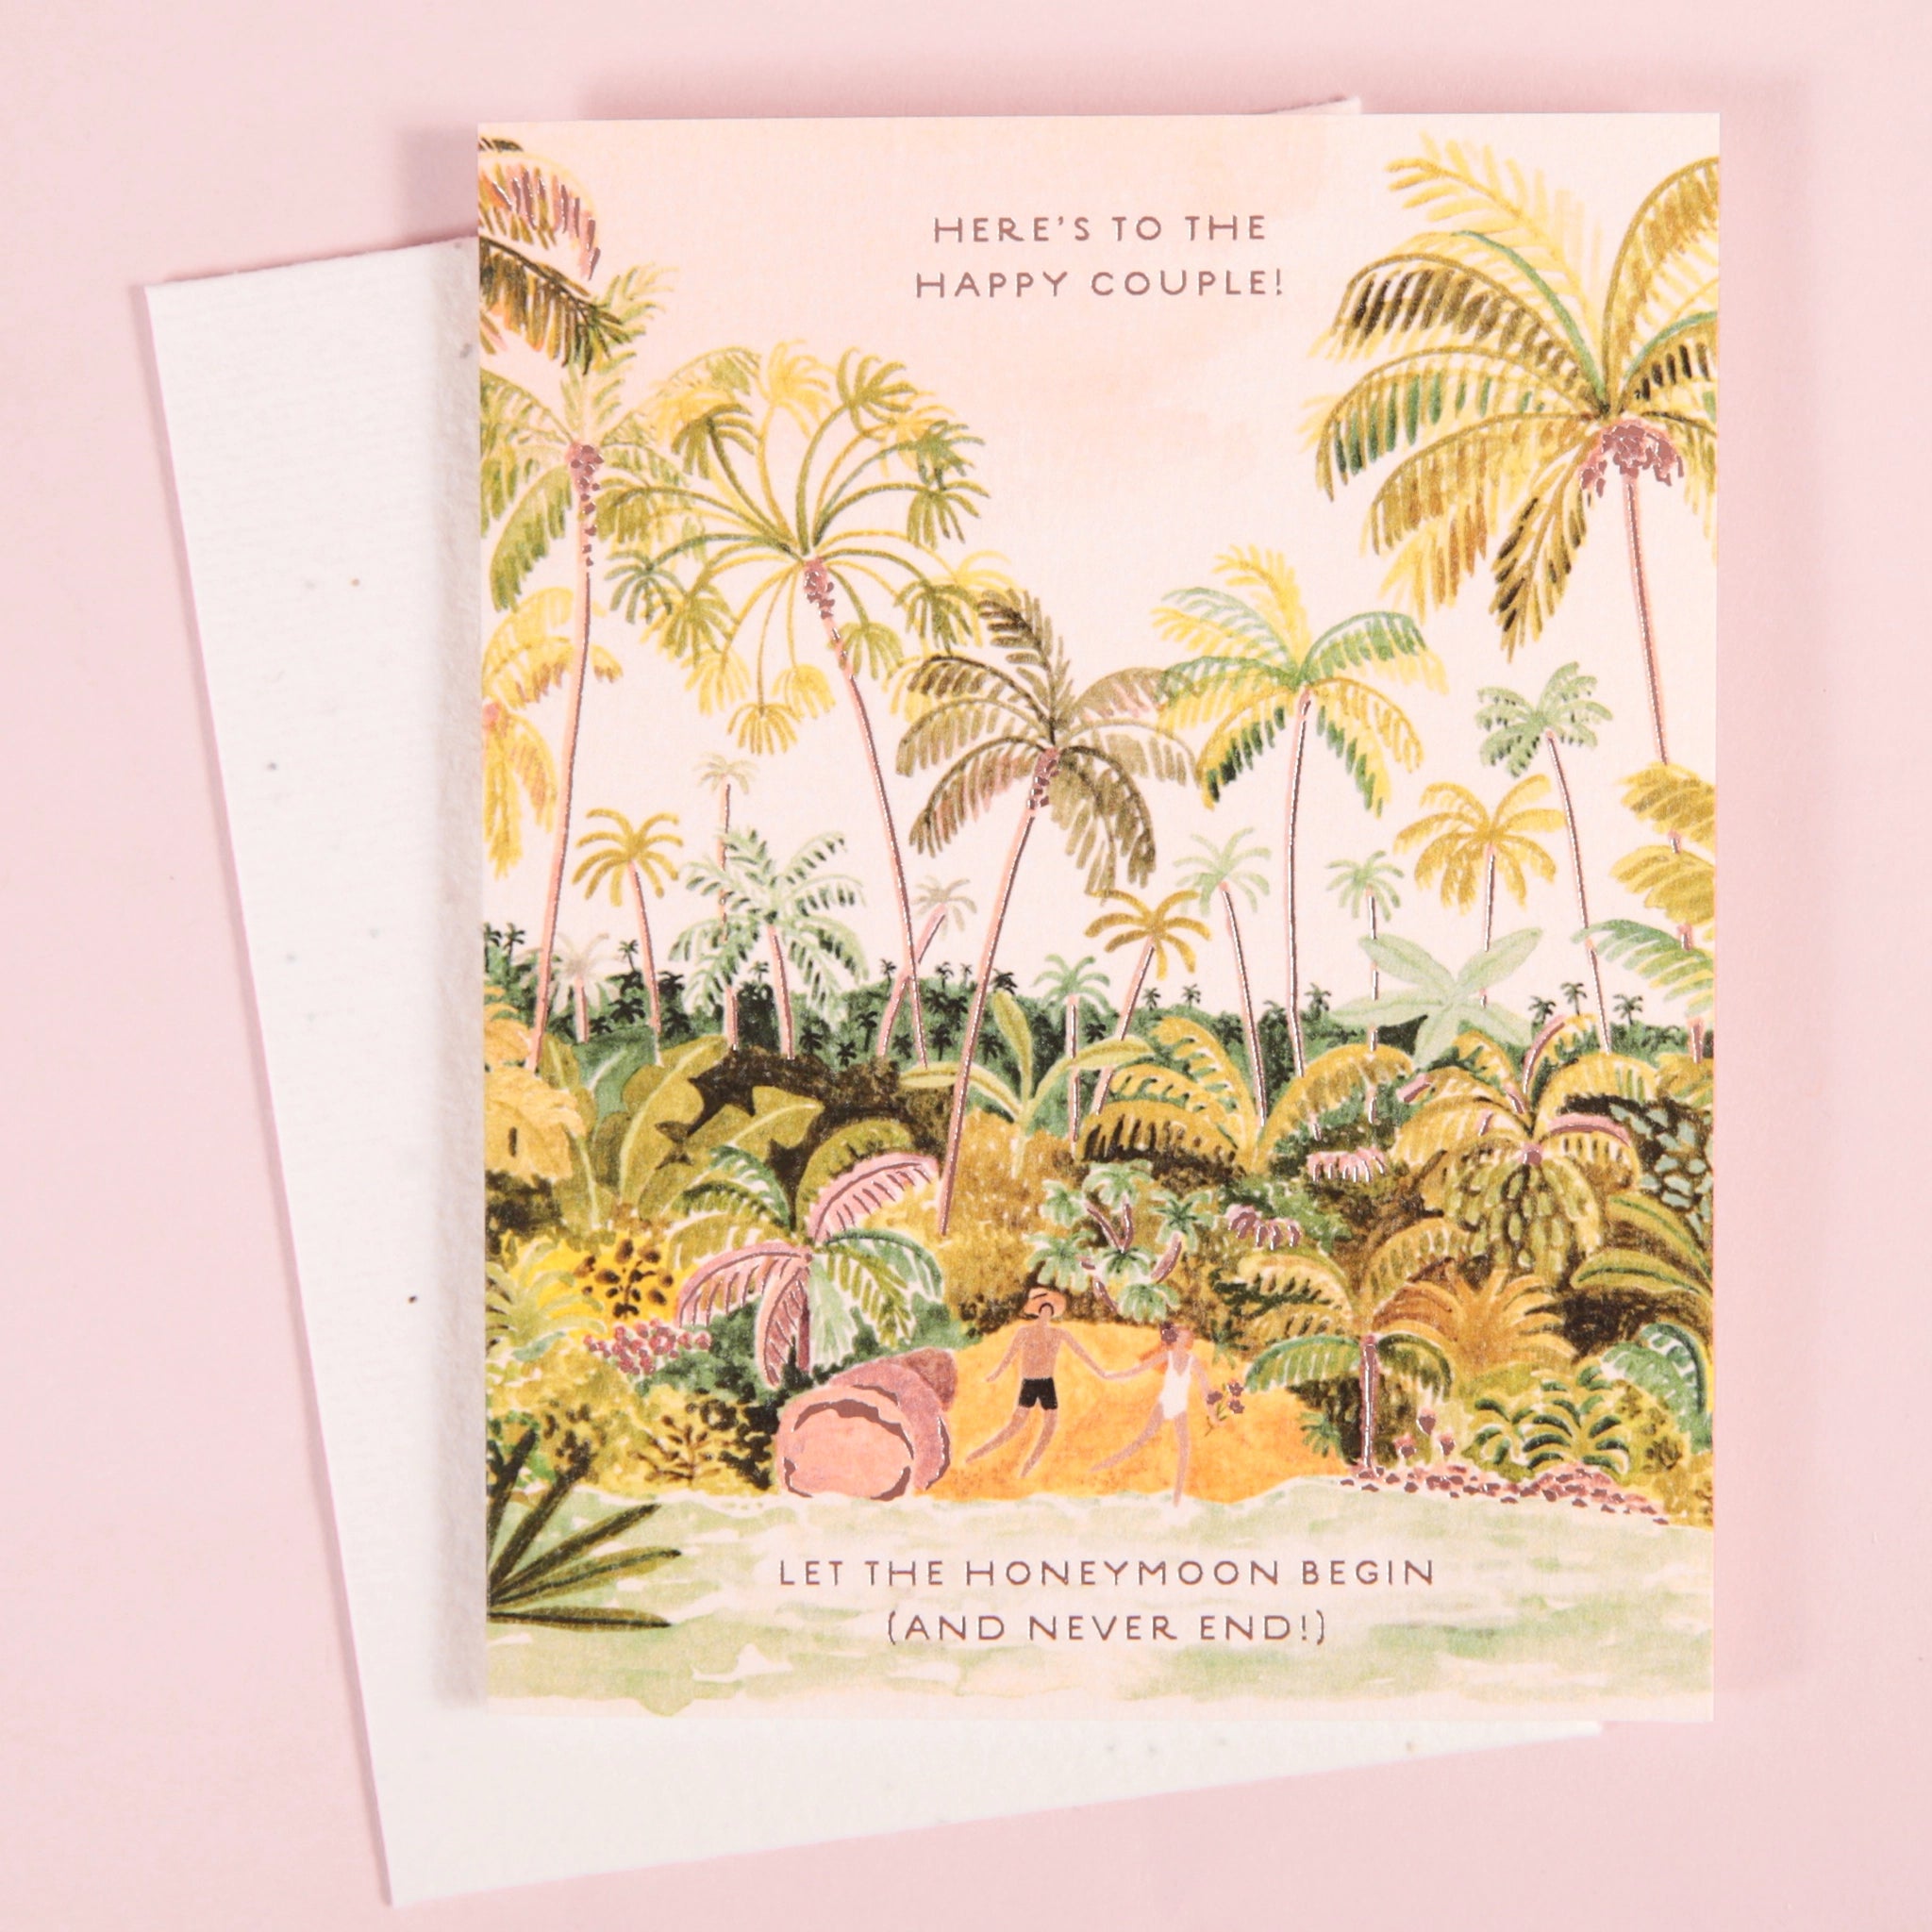 On a light pink background is a white envelope and card with a lush tropical illustration filled with palm trees and a couple holding hands on a beach toward the bottom along with text that reads, "Here's to the happy couple! Let the honeymoon begin (and never end!)".